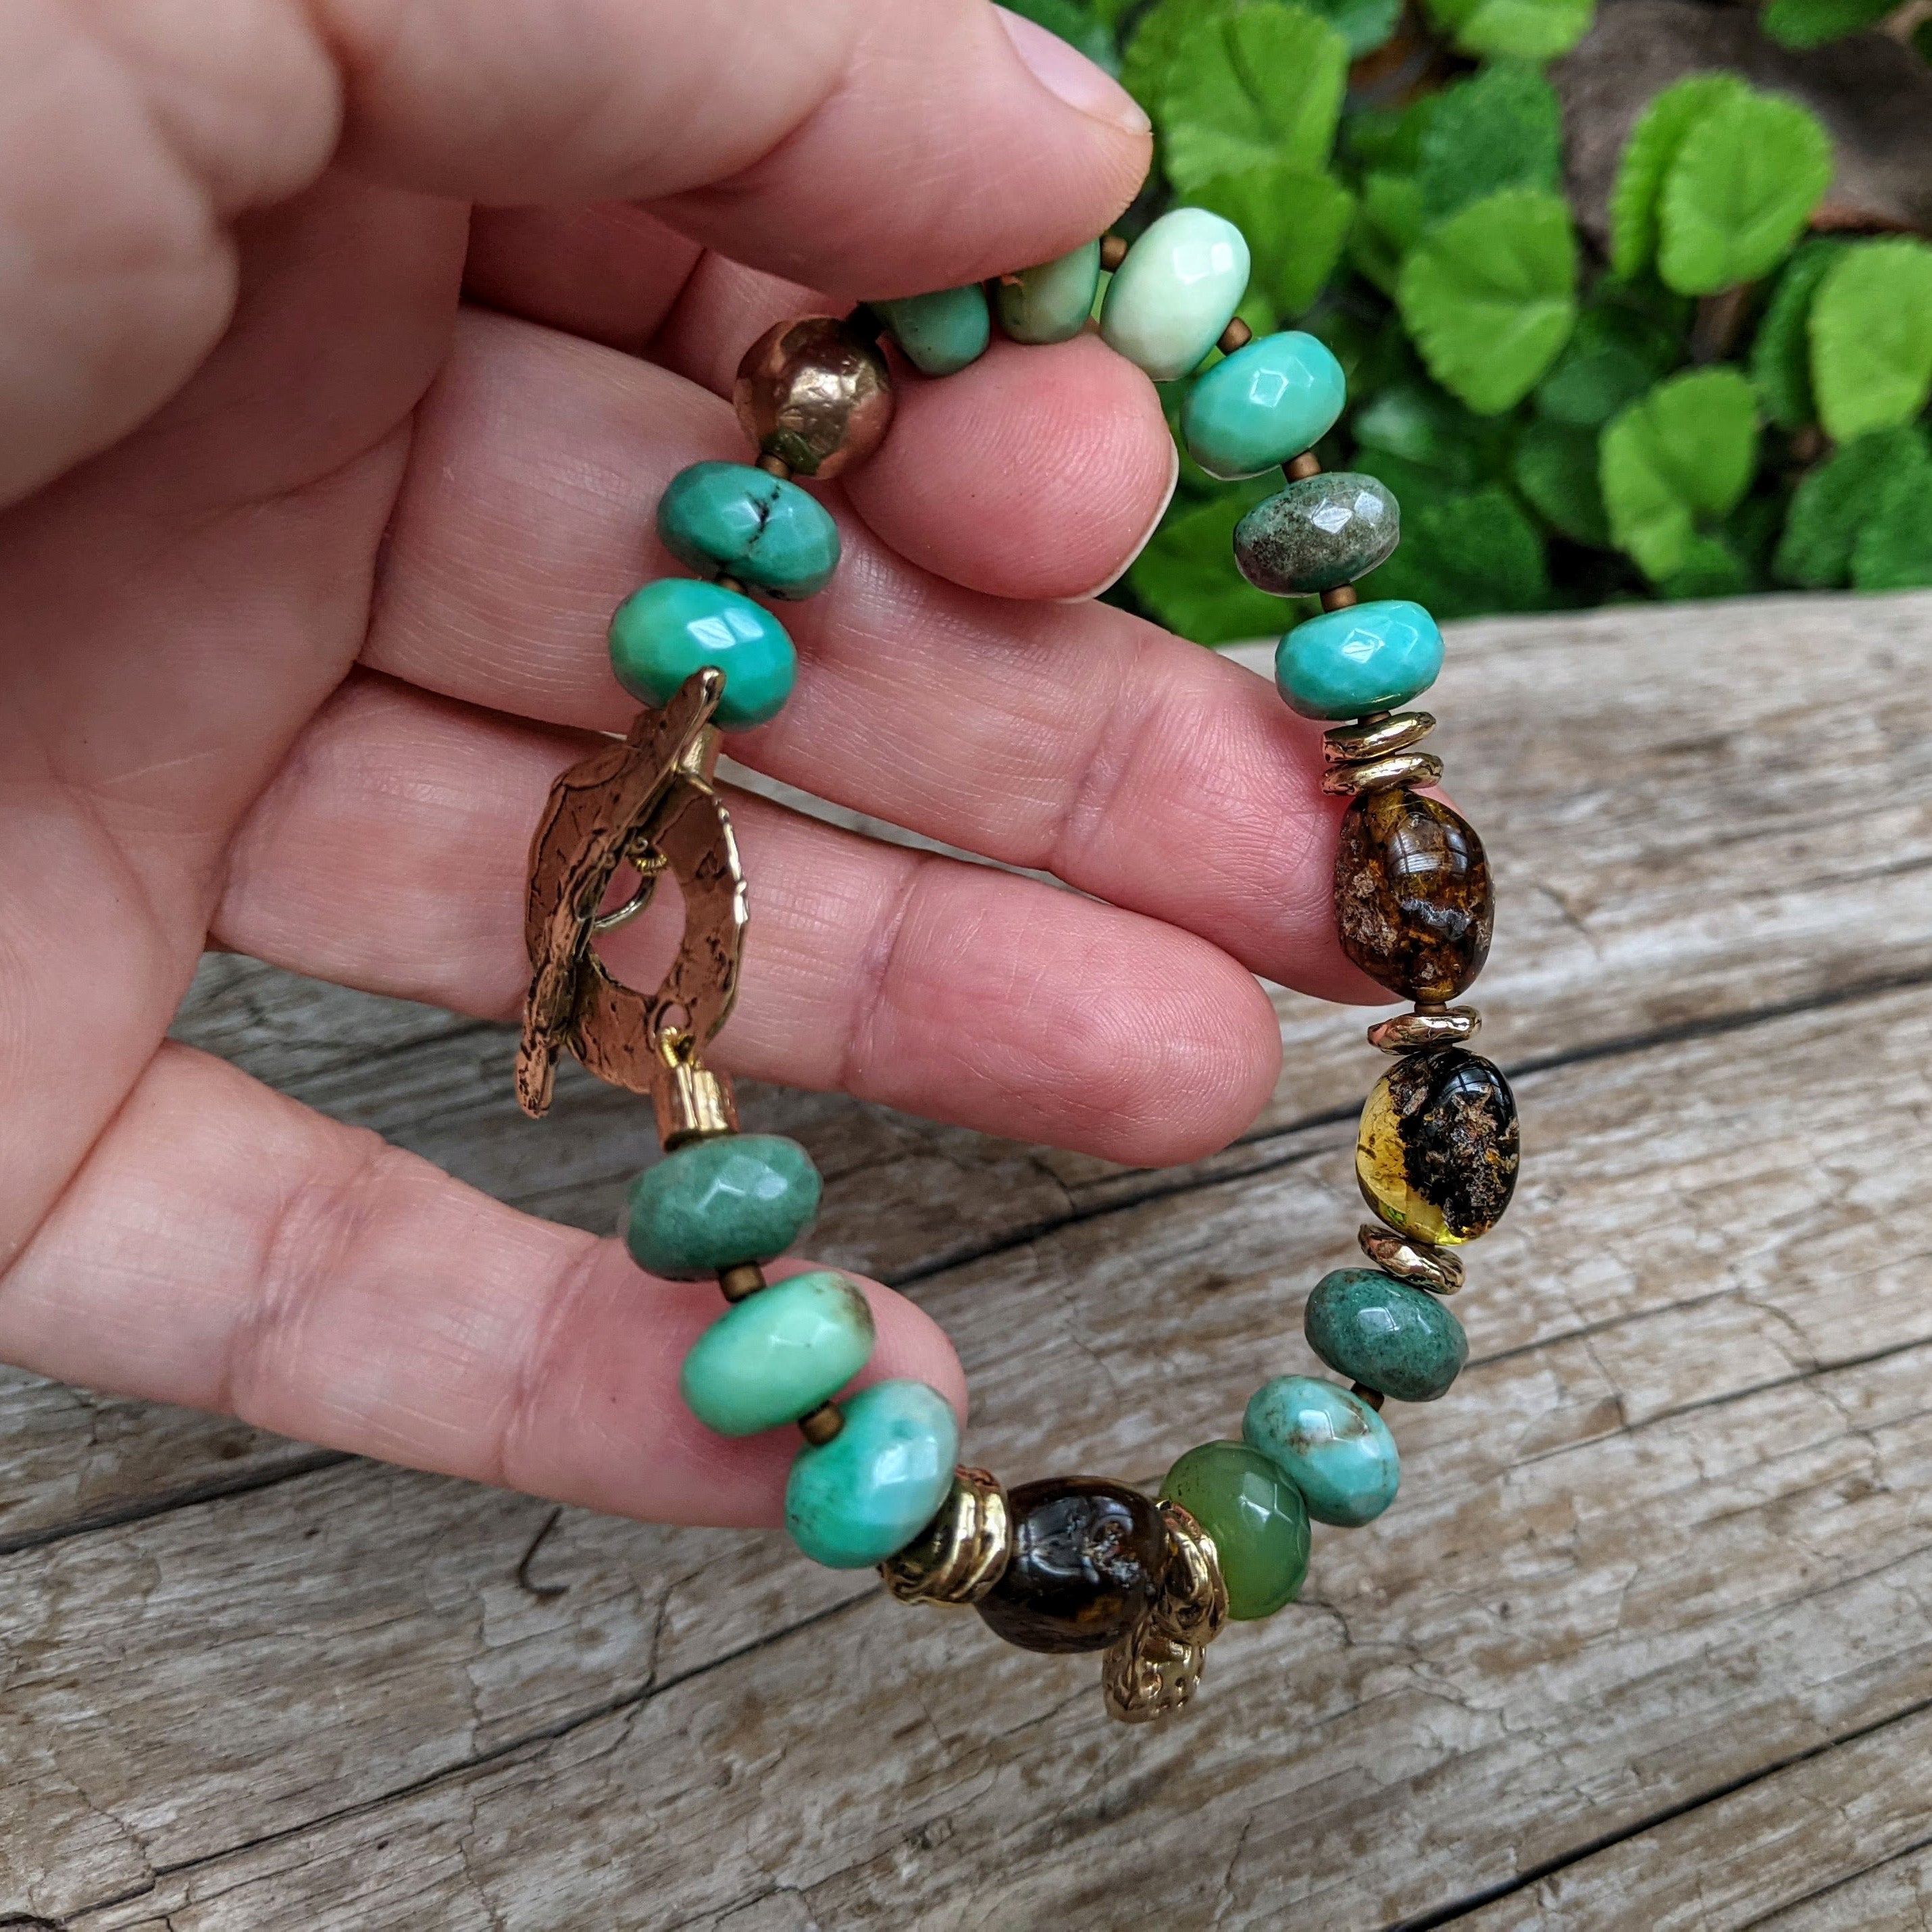 Grass green chrysoprase artisan bracelet with raw Baltic amber and gold bronze heart charm. Organic, rustic, handmade bracelet. Handcrafted by Aurora Creative Jewellery.